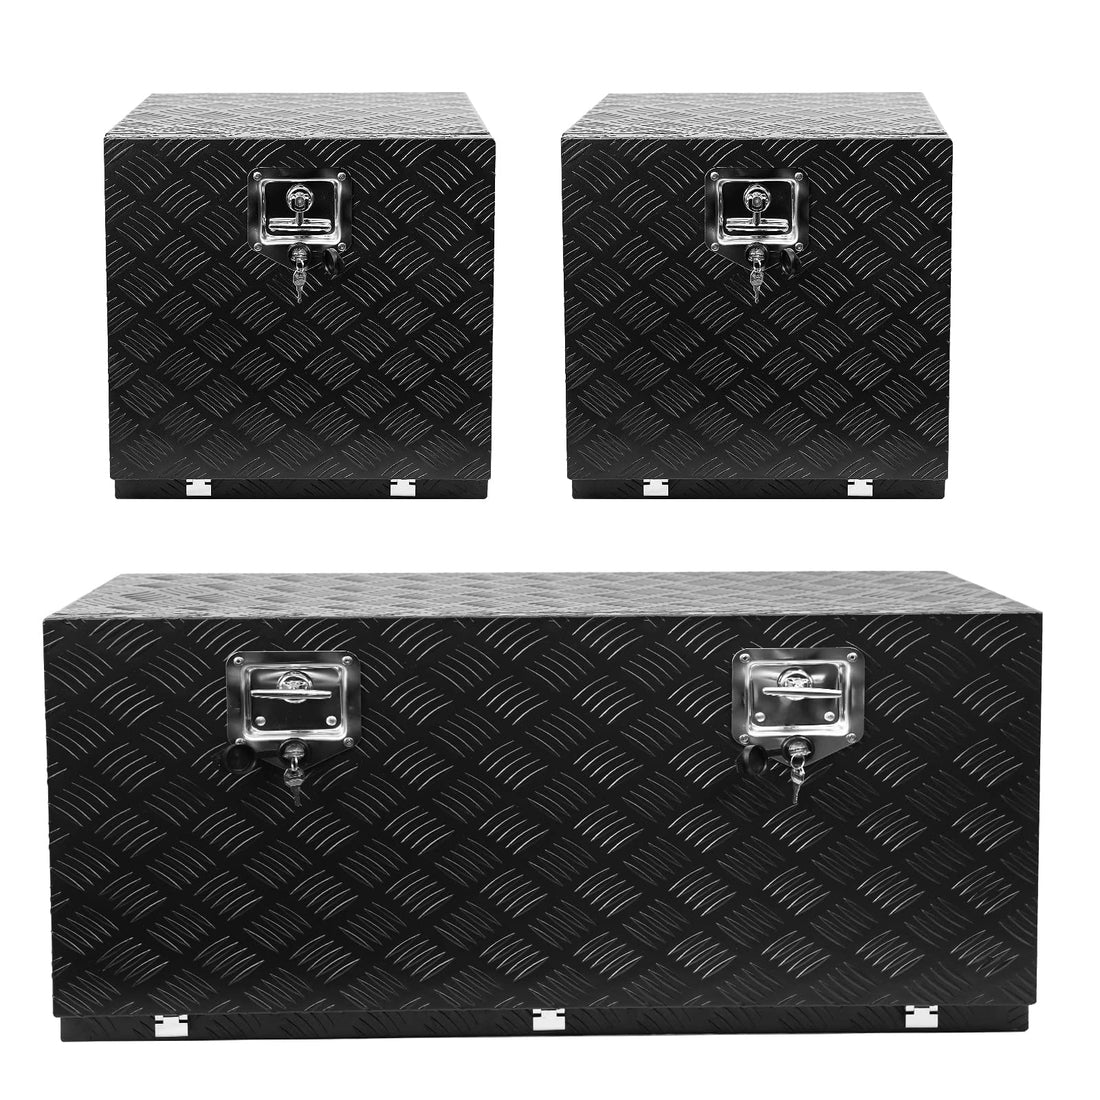 48Inch+18Inch+18Inch Trailer Toolbox, Diamond Plate Chest